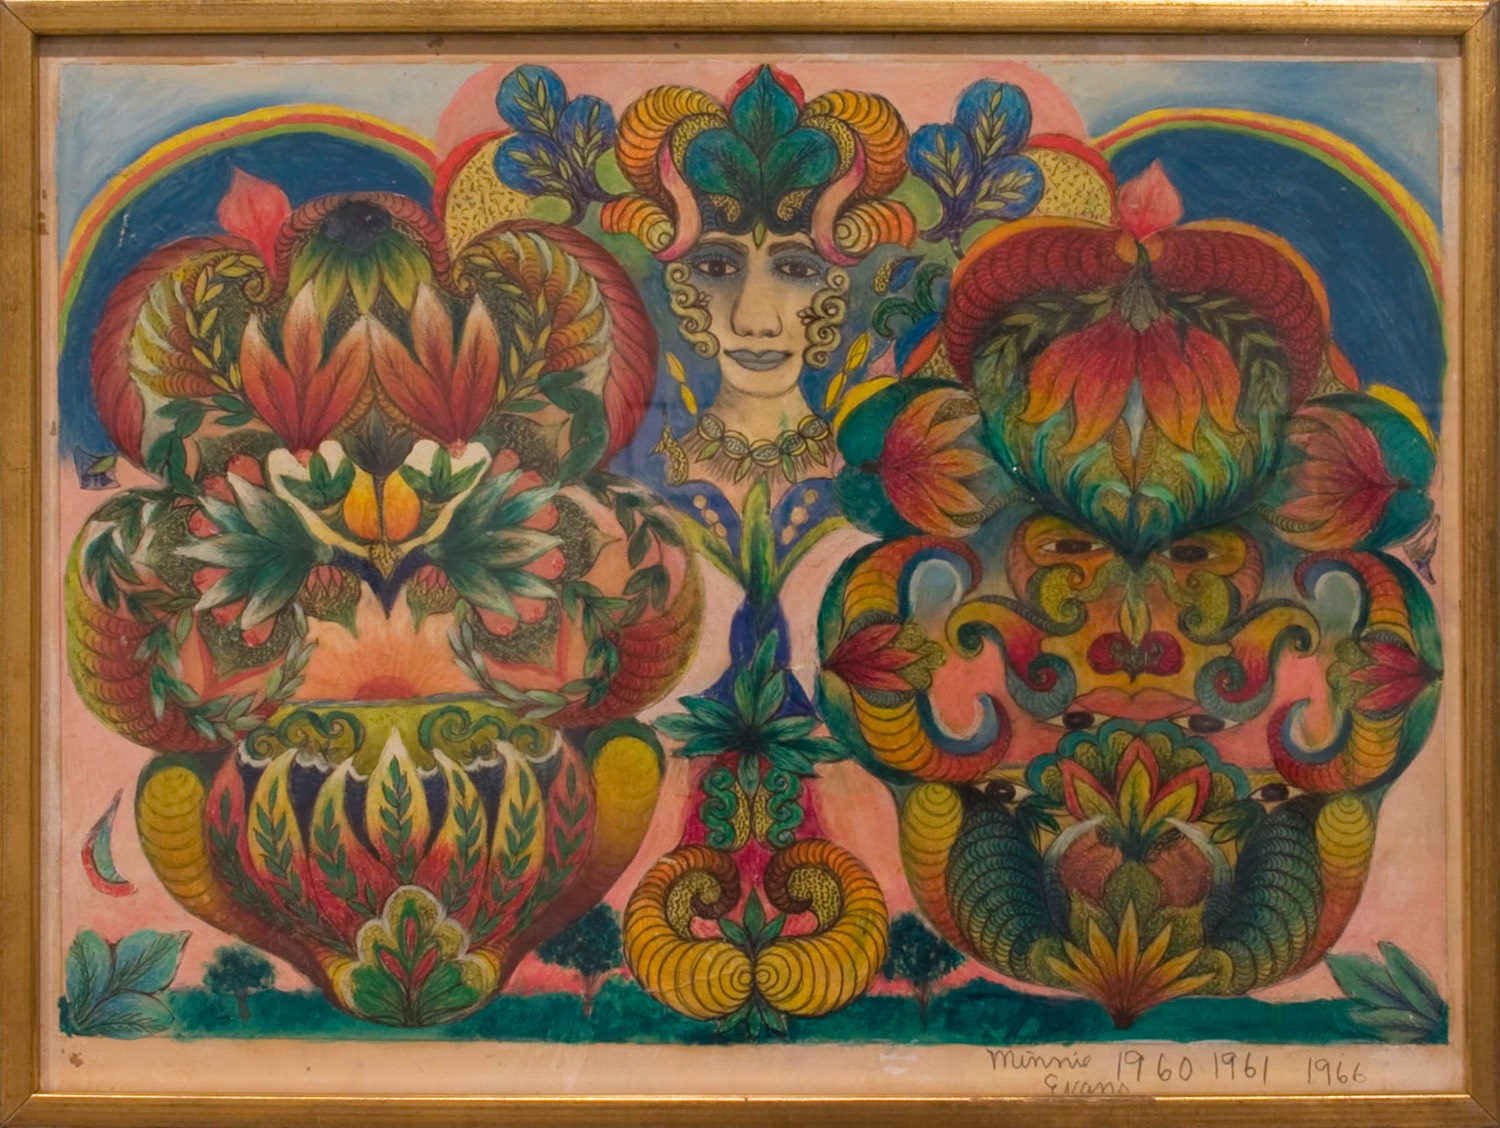 Centrally placed human head from the neck up flanked on both sides by colorful decorative patterns and foliage